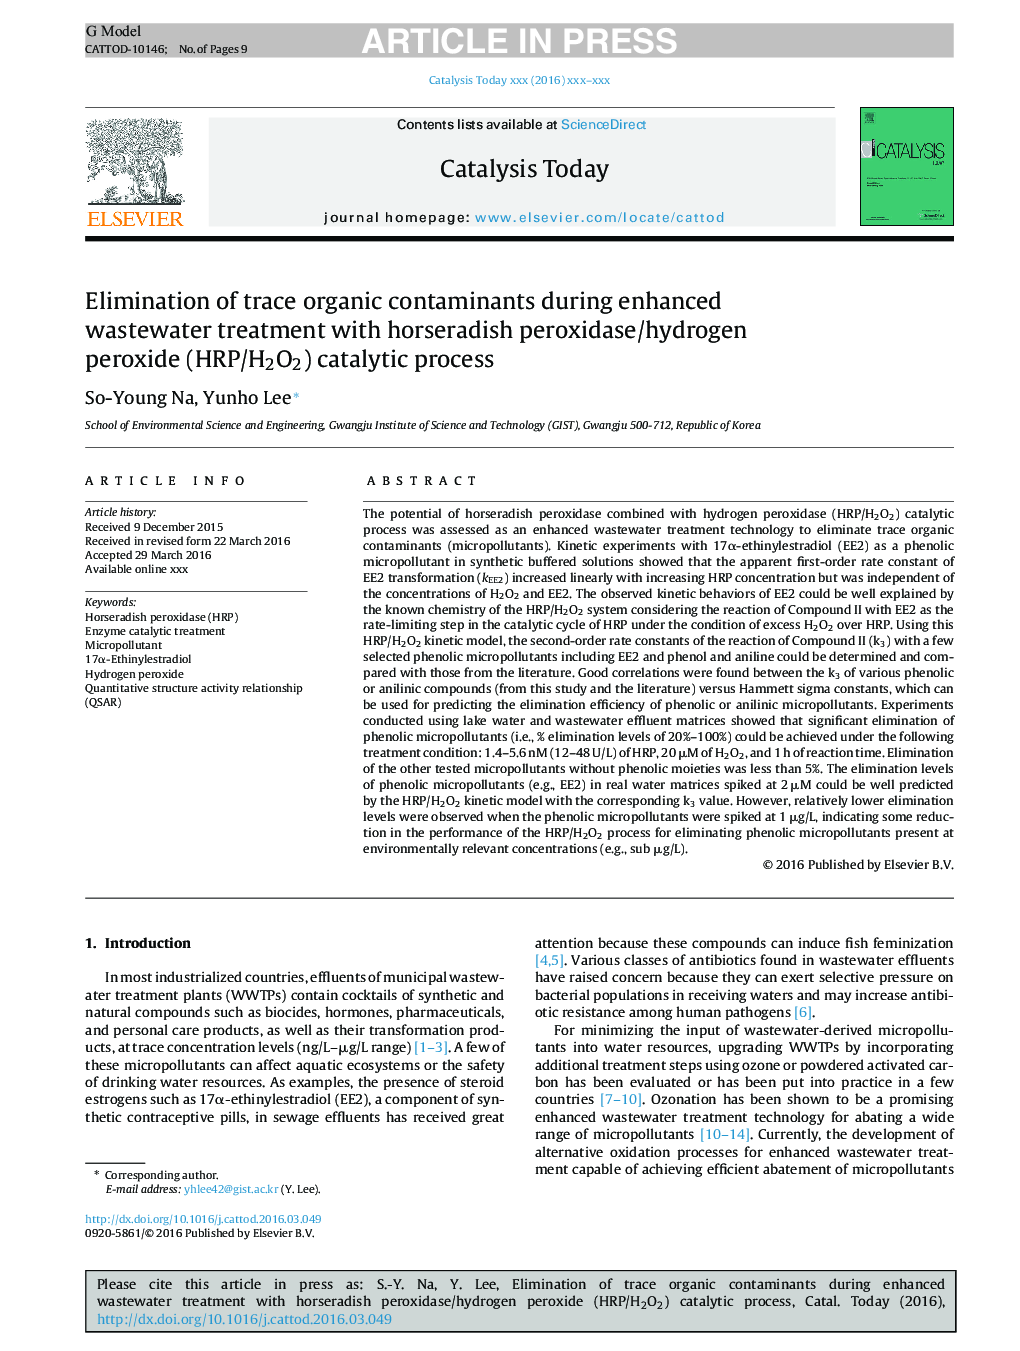 Elimination of trace organic contaminants during enhanced wastewater treatment with horseradish peroxidase/hydrogen peroxide (HRP/H2O2) catalytic process